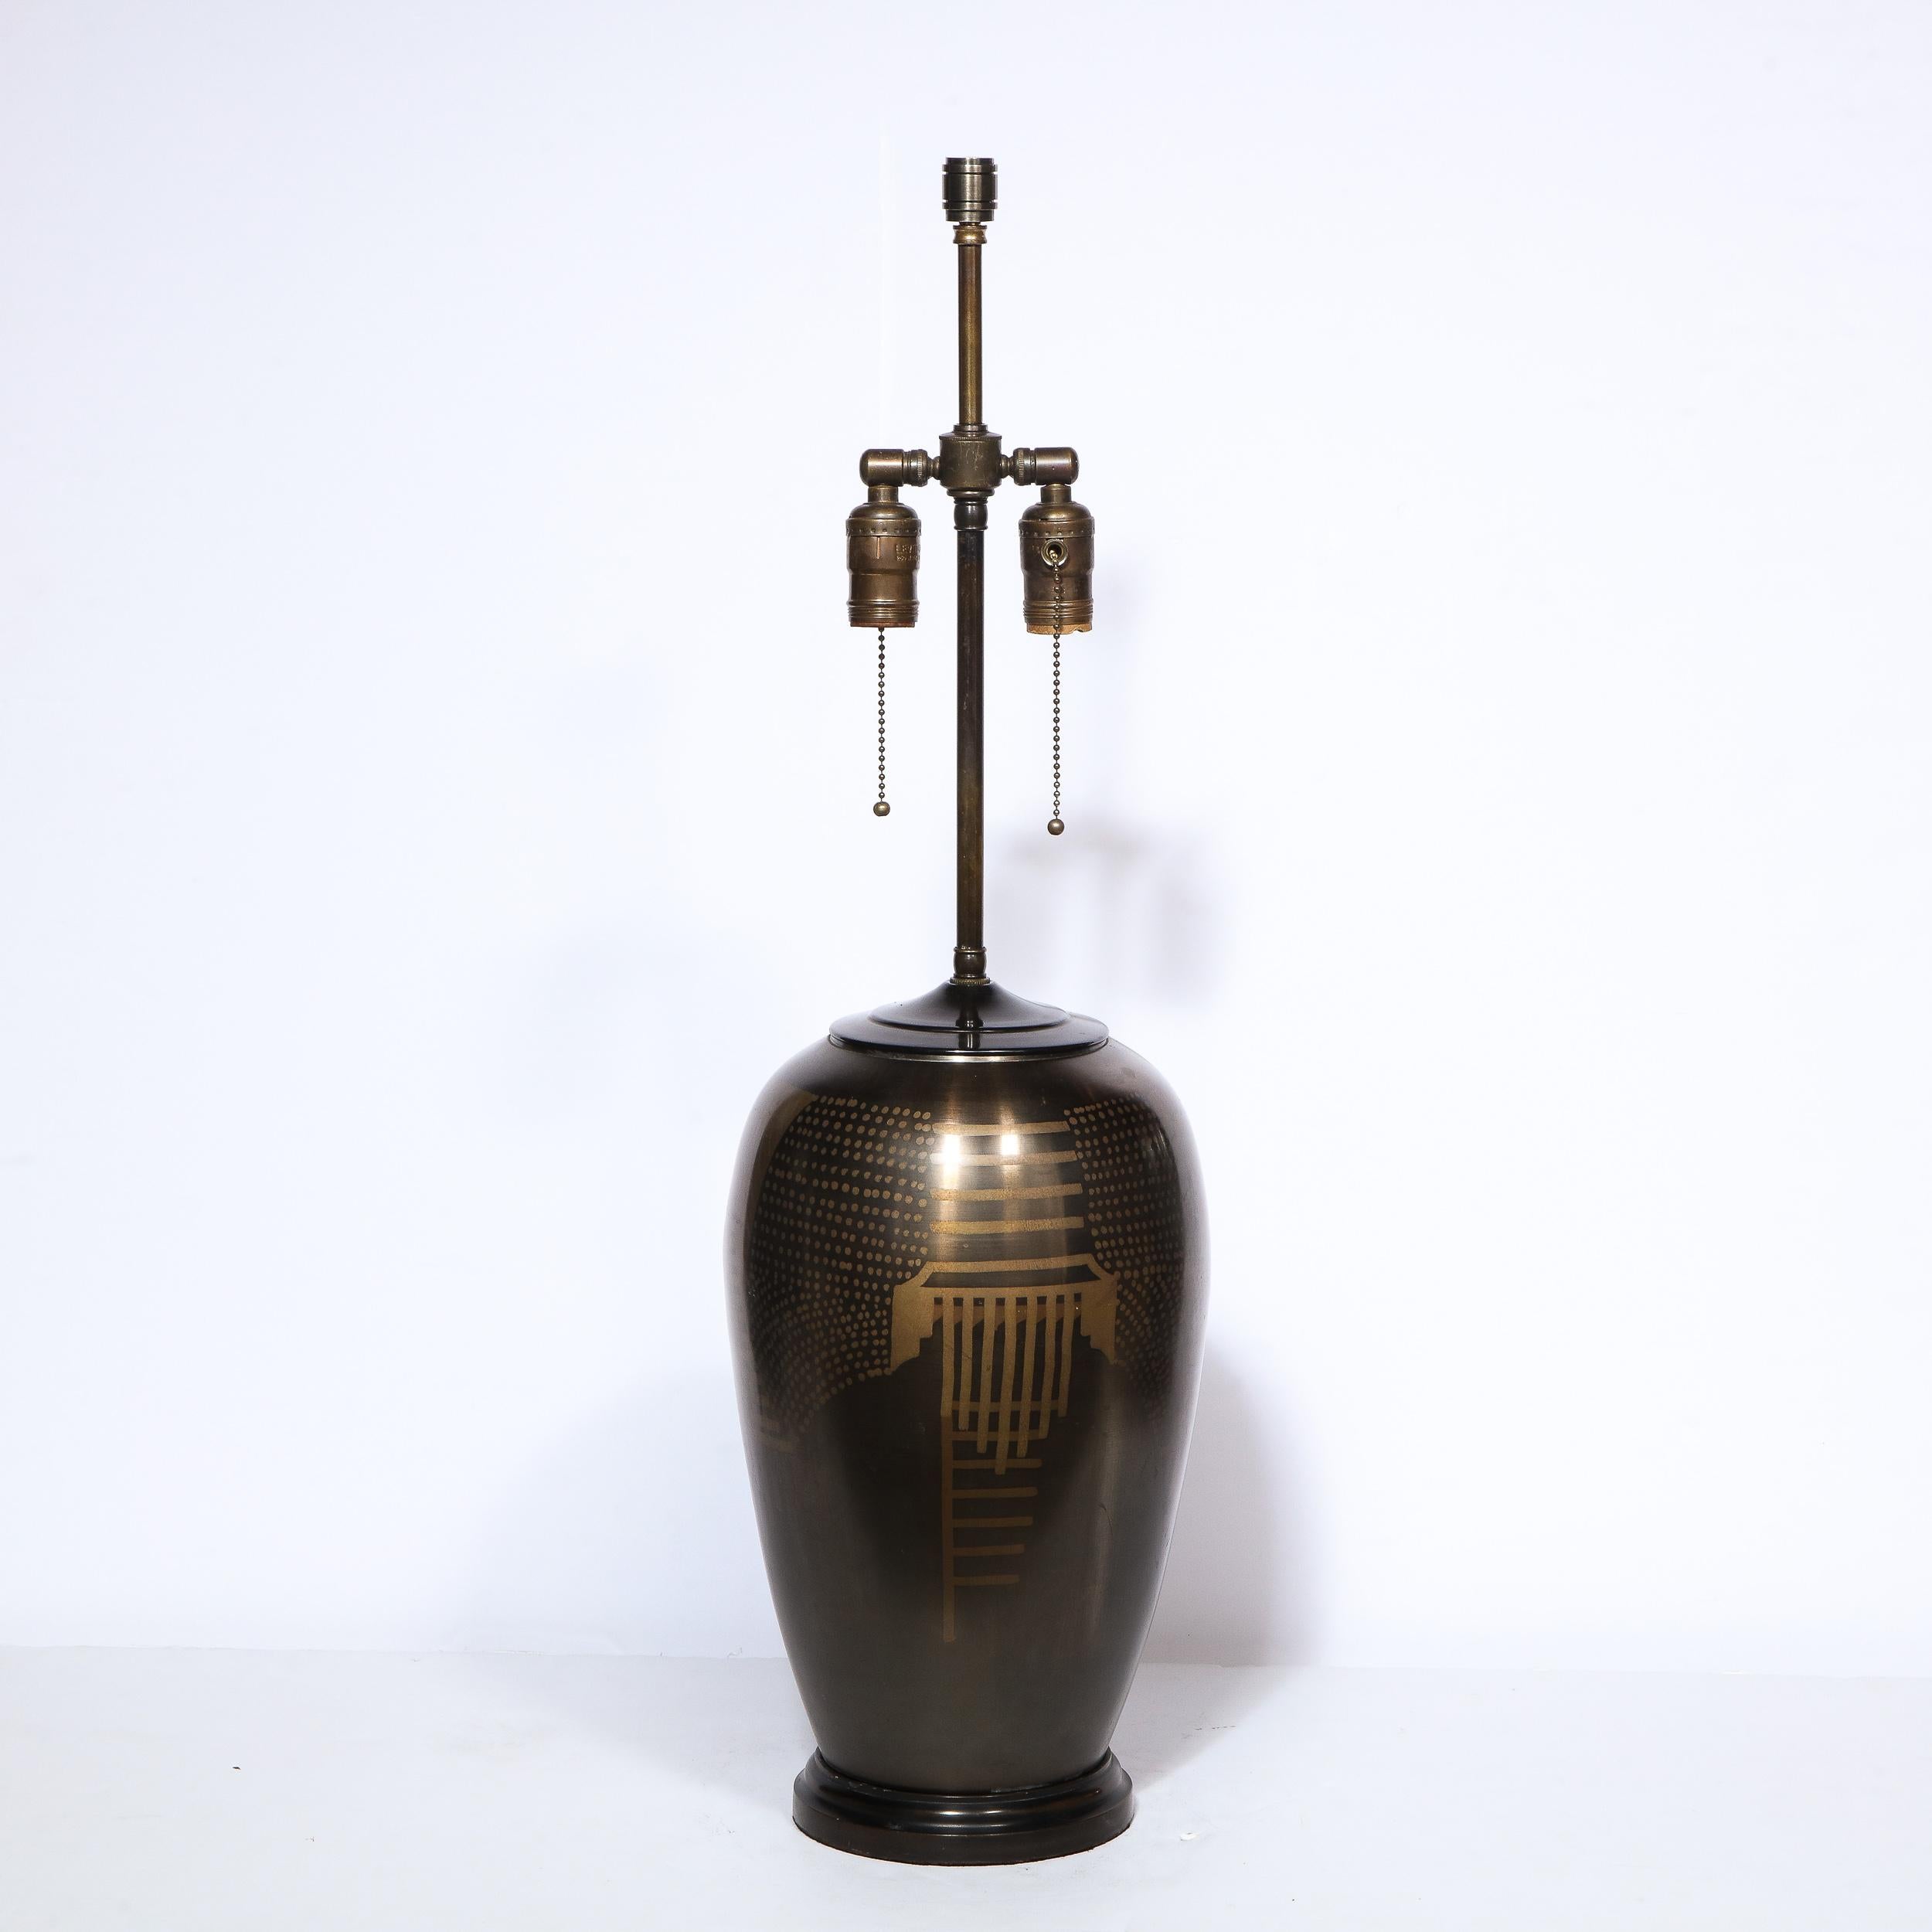 American Art Deco Revival Bronze Table Lamp with Handpainted Gold Cubist Motifs